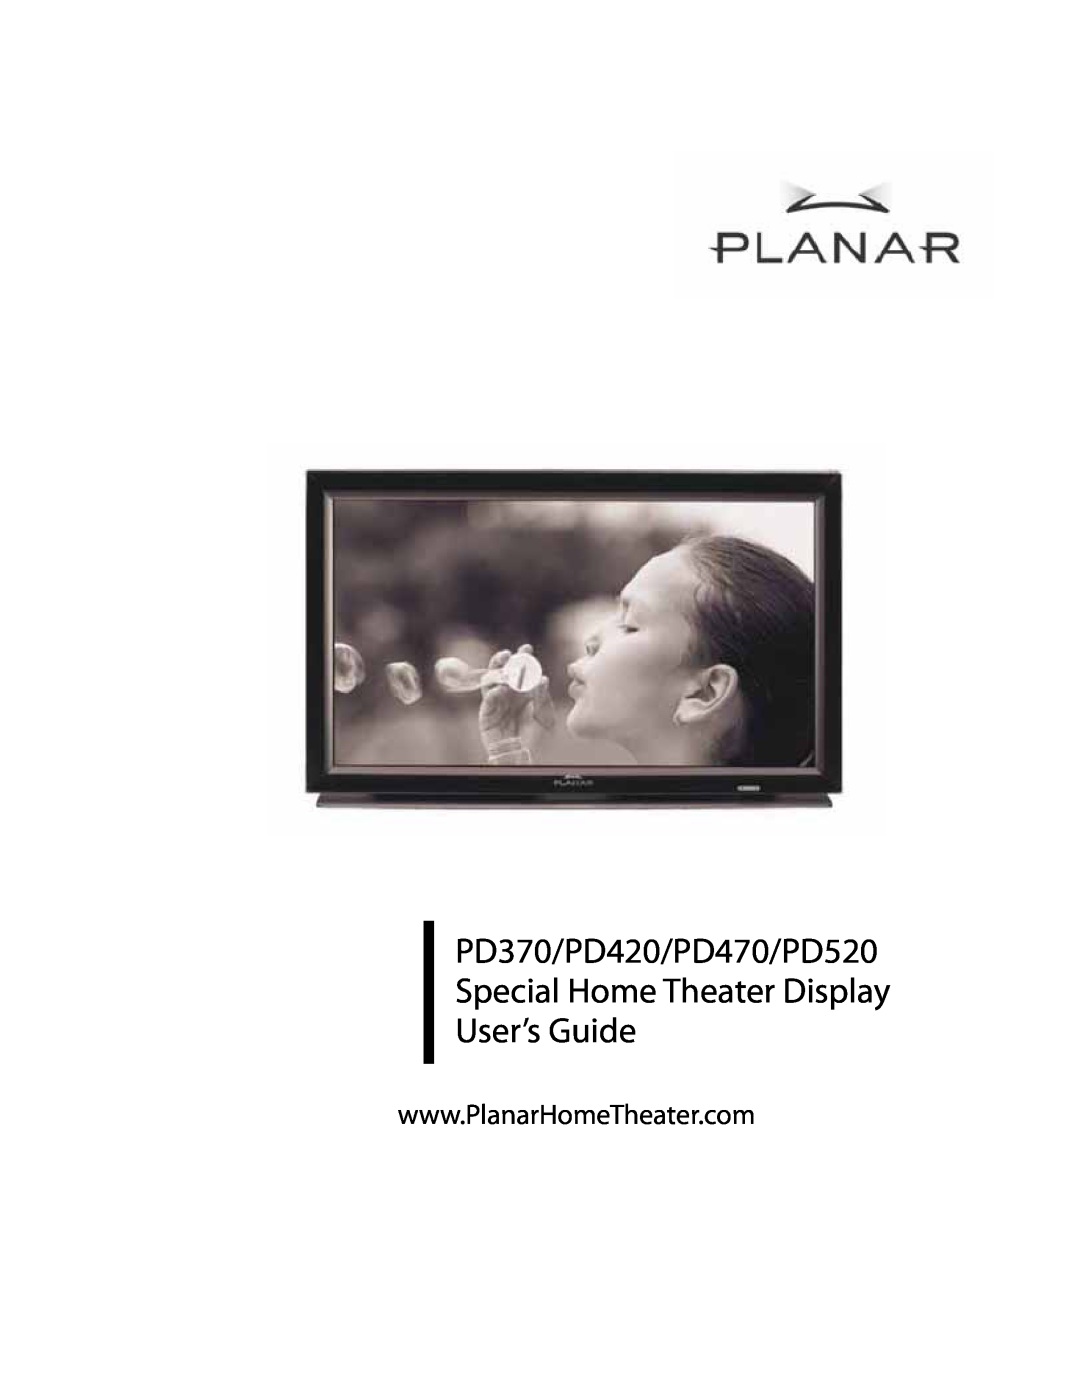 Planar manual PD370/PD420/PD470/PD520, Special Home Theater Display User’s Guide 